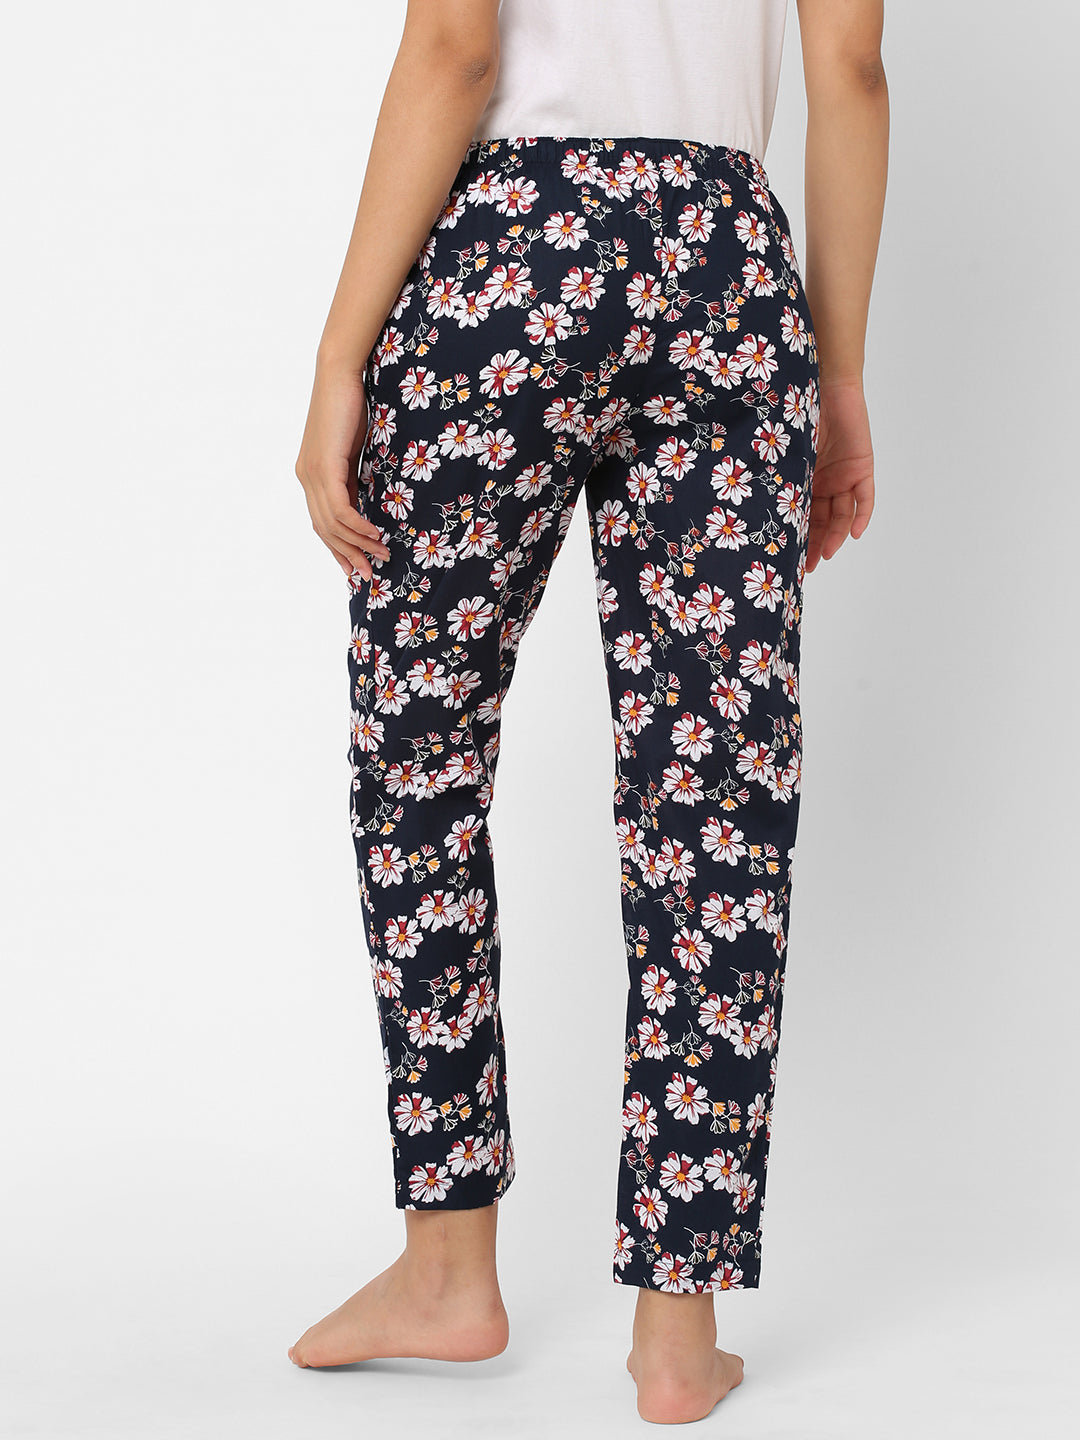 Women's Floral Print, Navy, Cotton, Regular Fit, Elasticated, Waistband, Pyjama  With Side Pockets